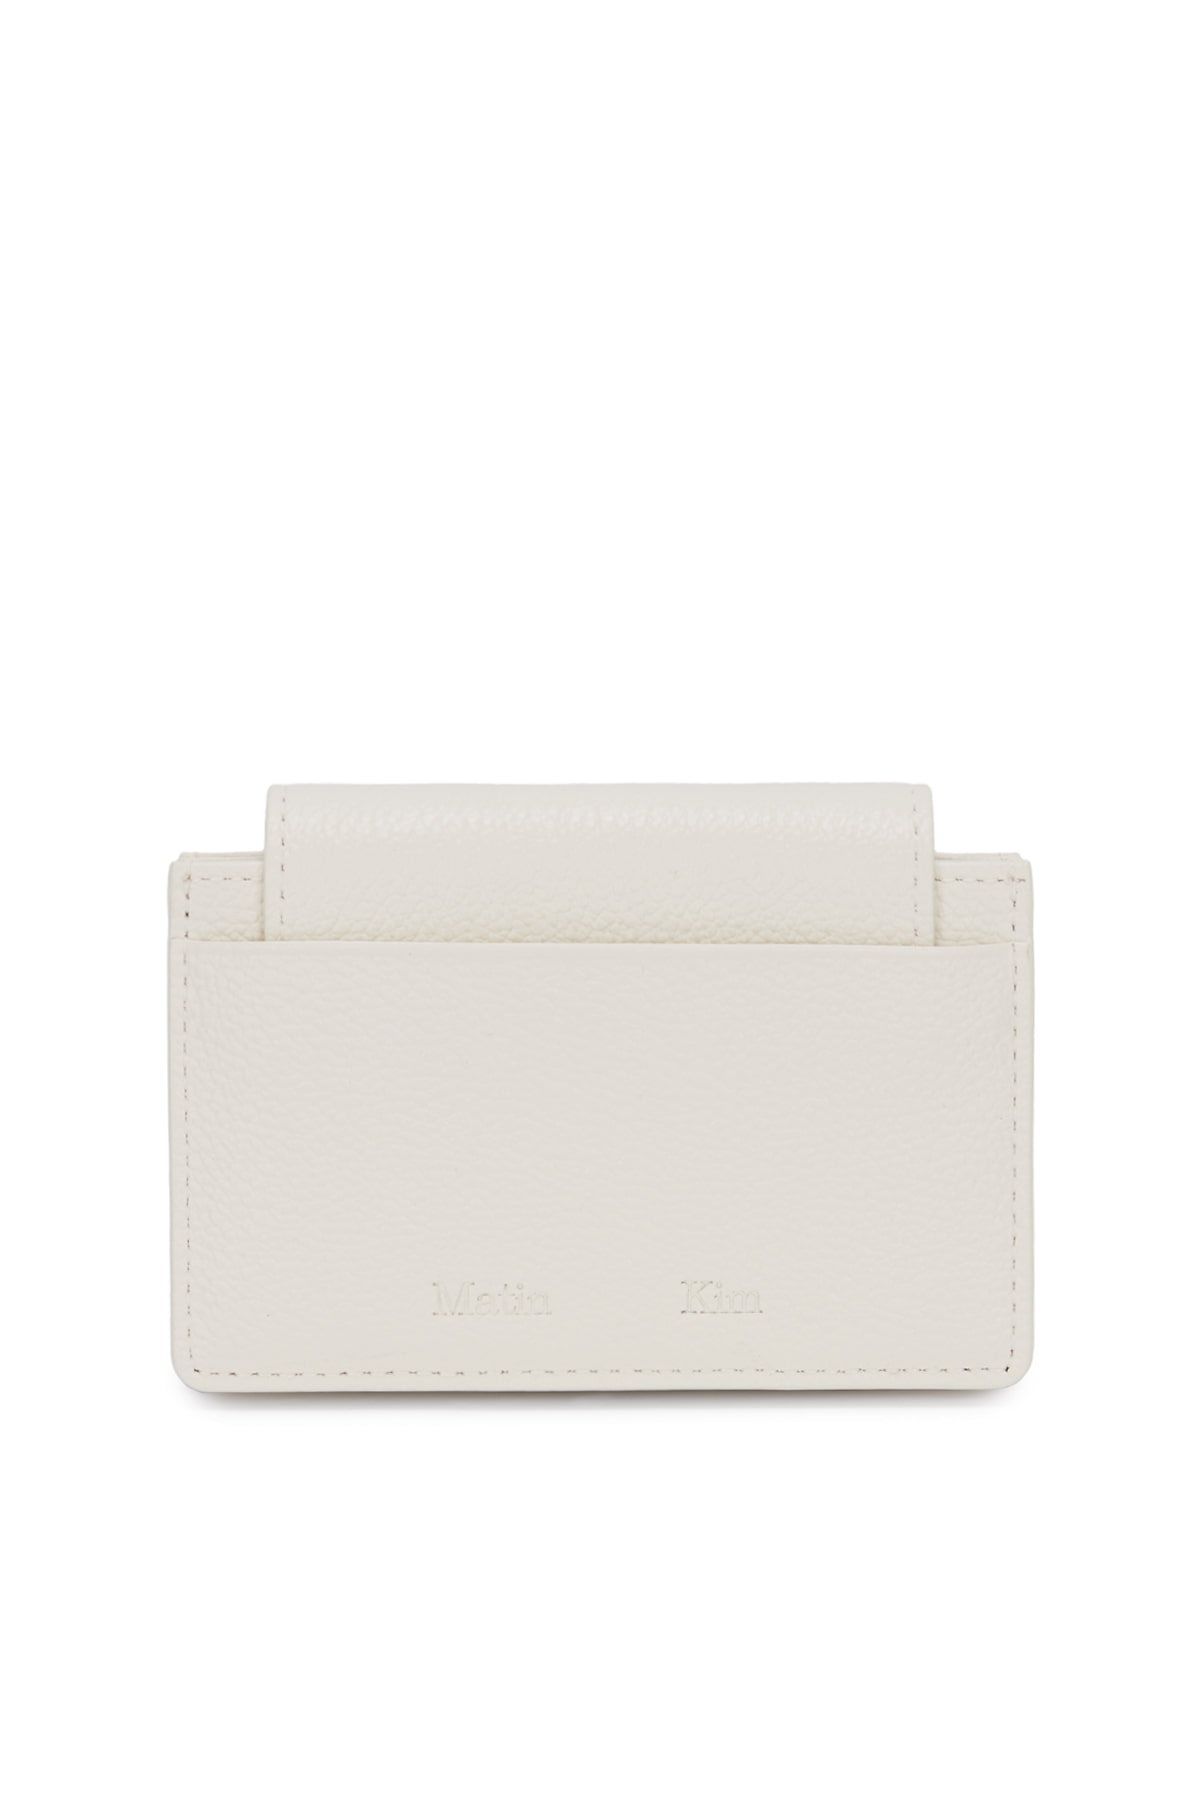 ACCORDION WALLET IN WHITE